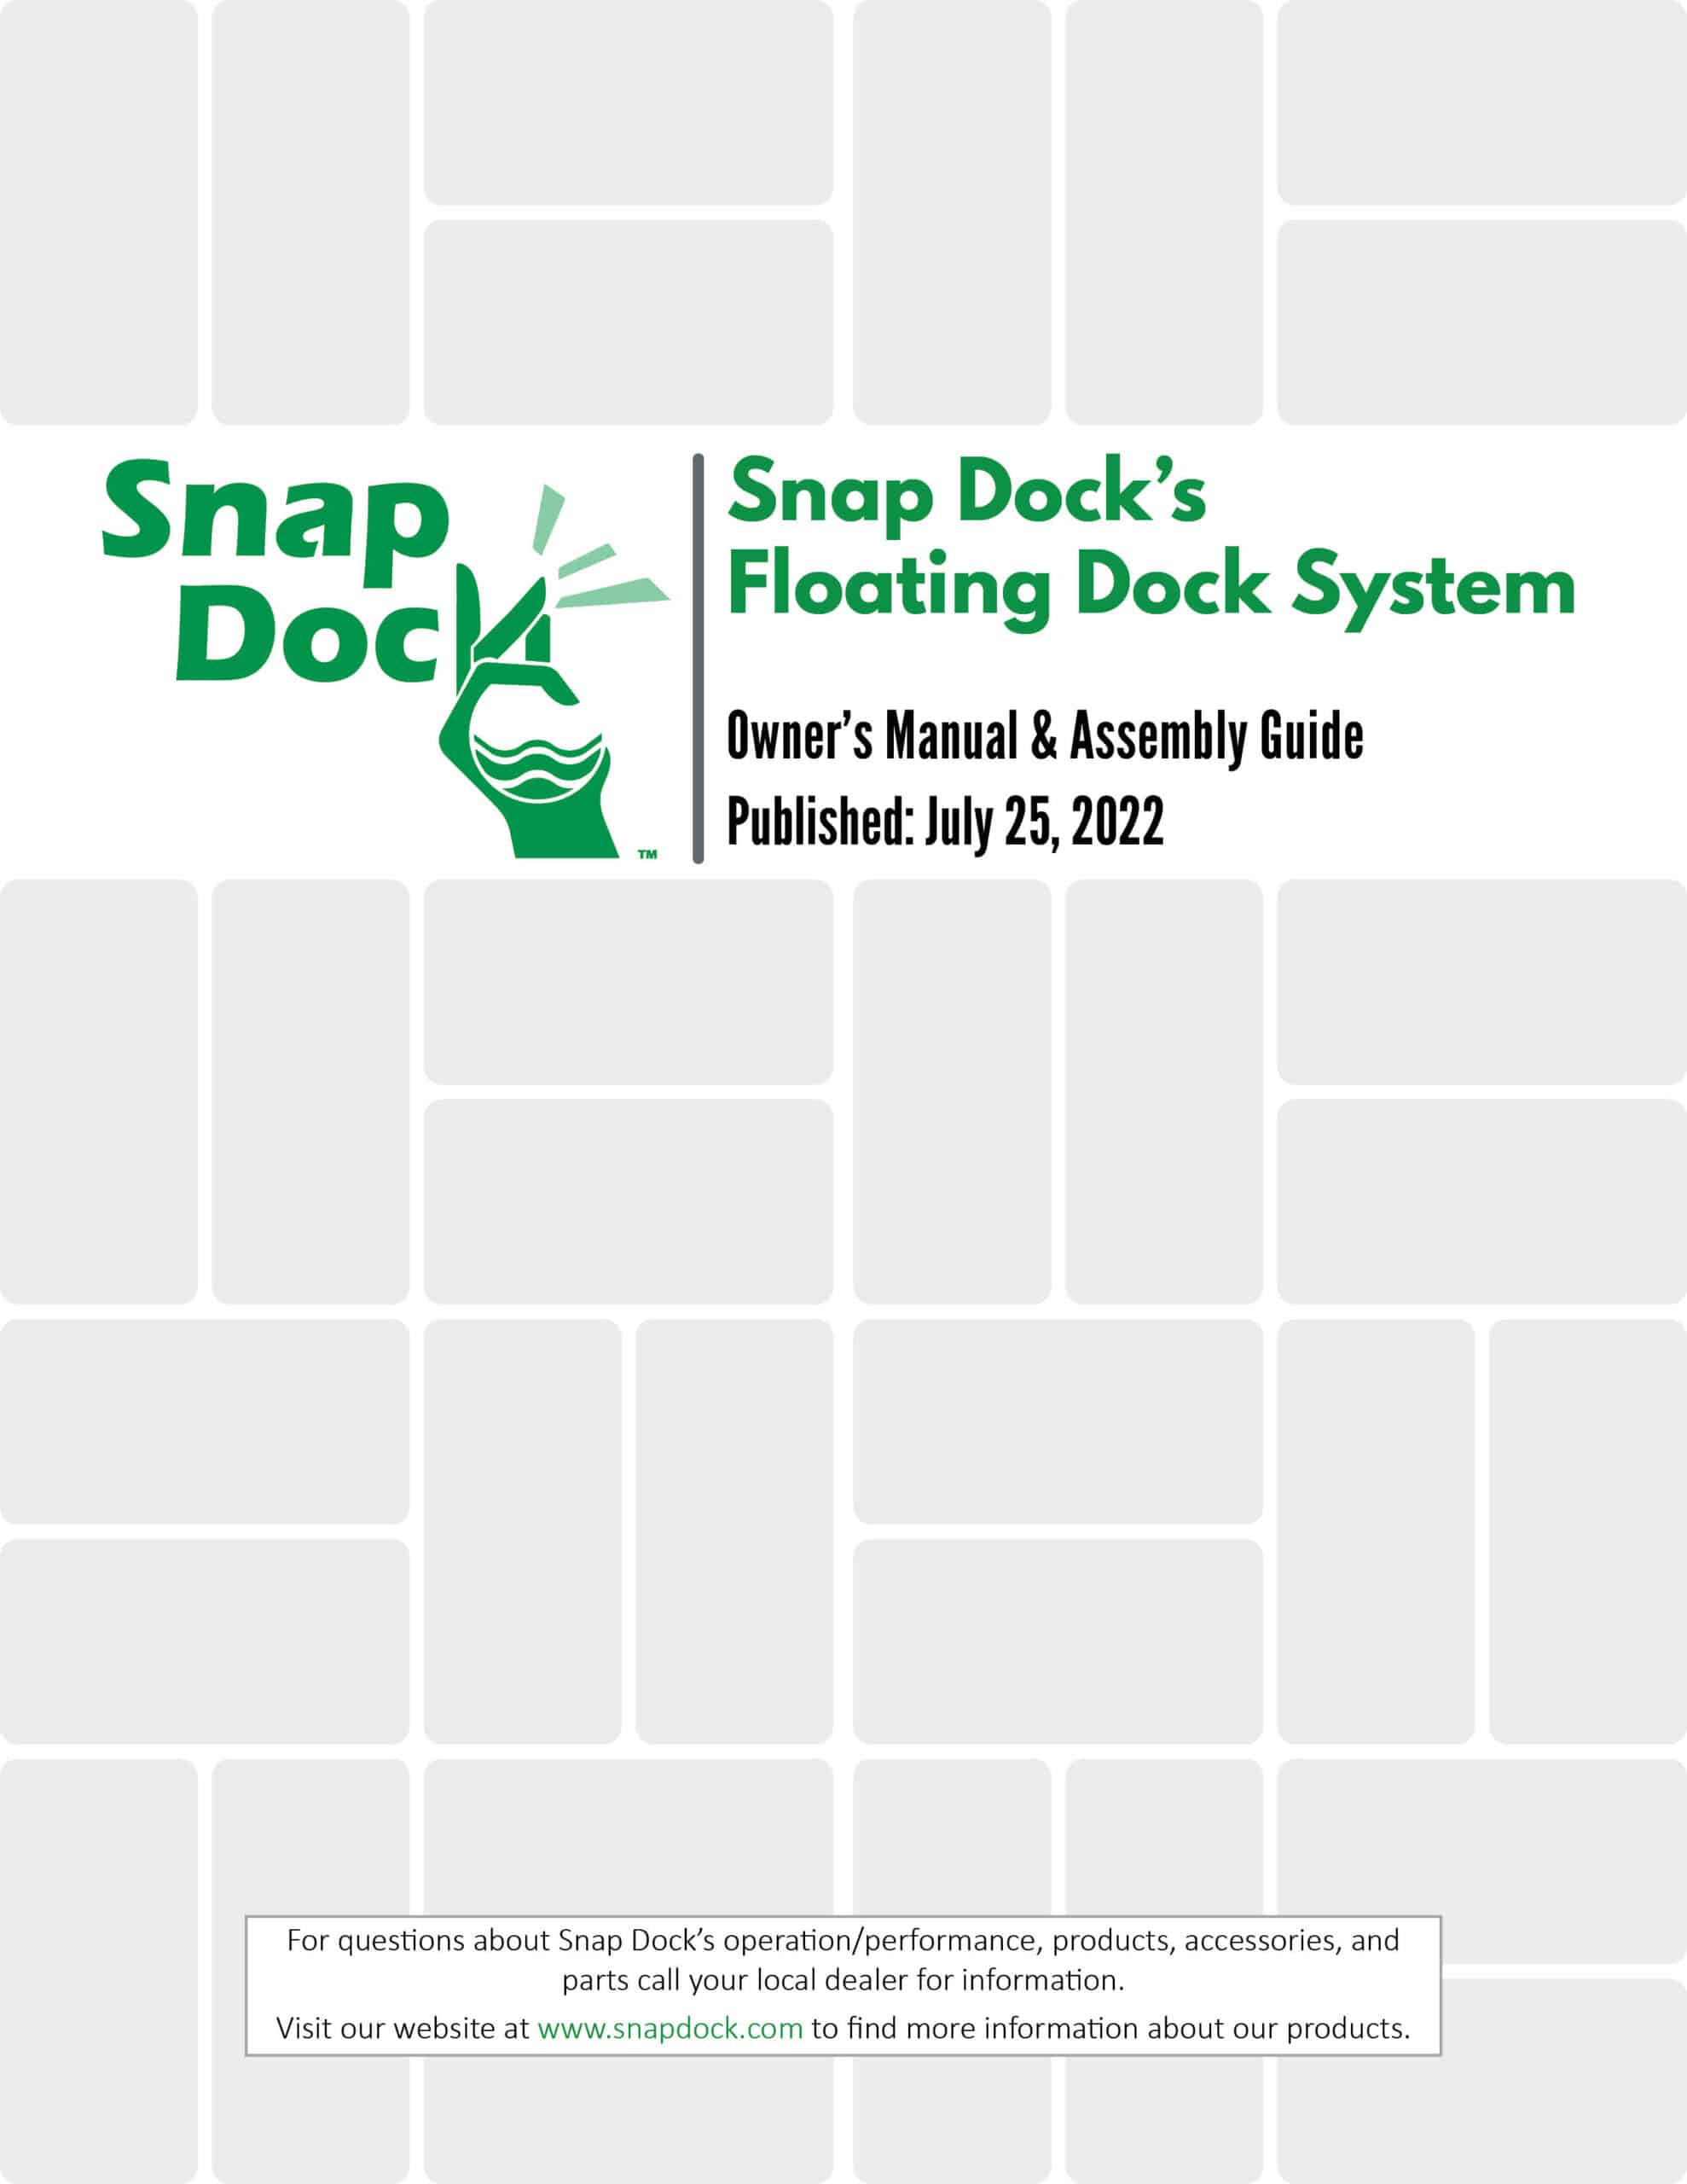 snap dock floating dock owners manual